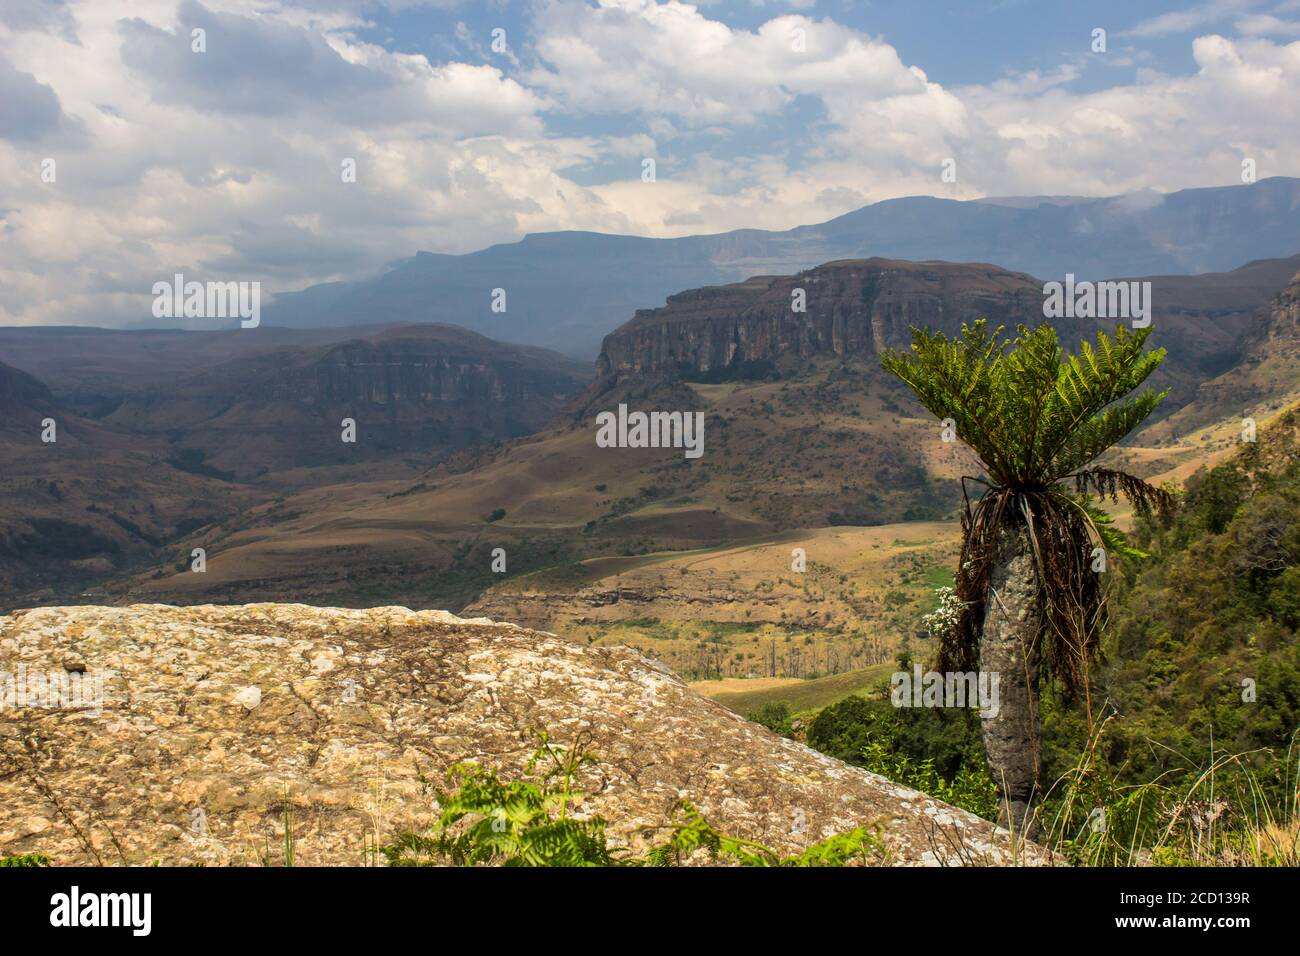 A single common tree fern, Alsophila Dregei, overlooking the Injisuthi Valley in the central Drakensberg Mountains, South Africa Stock Photo